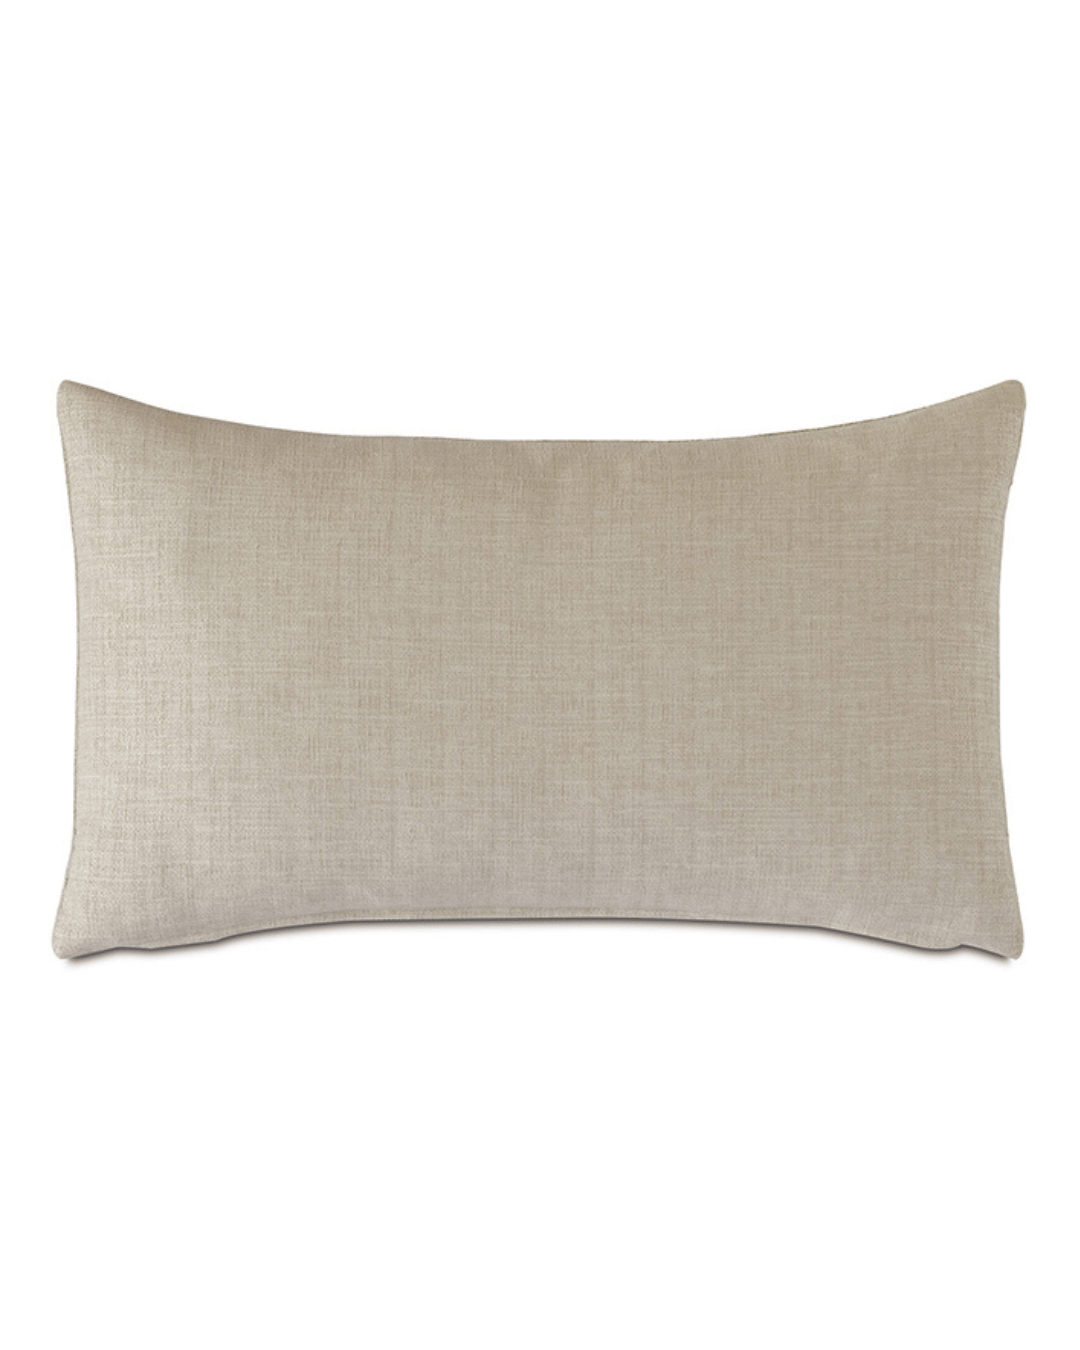 A rectangular beige lumbar pillow on a white background, ideal for a Scottsdale Arizona bungalow, like the Eastern Accents RICH TEXTURED DECORATIVE PILLOW.